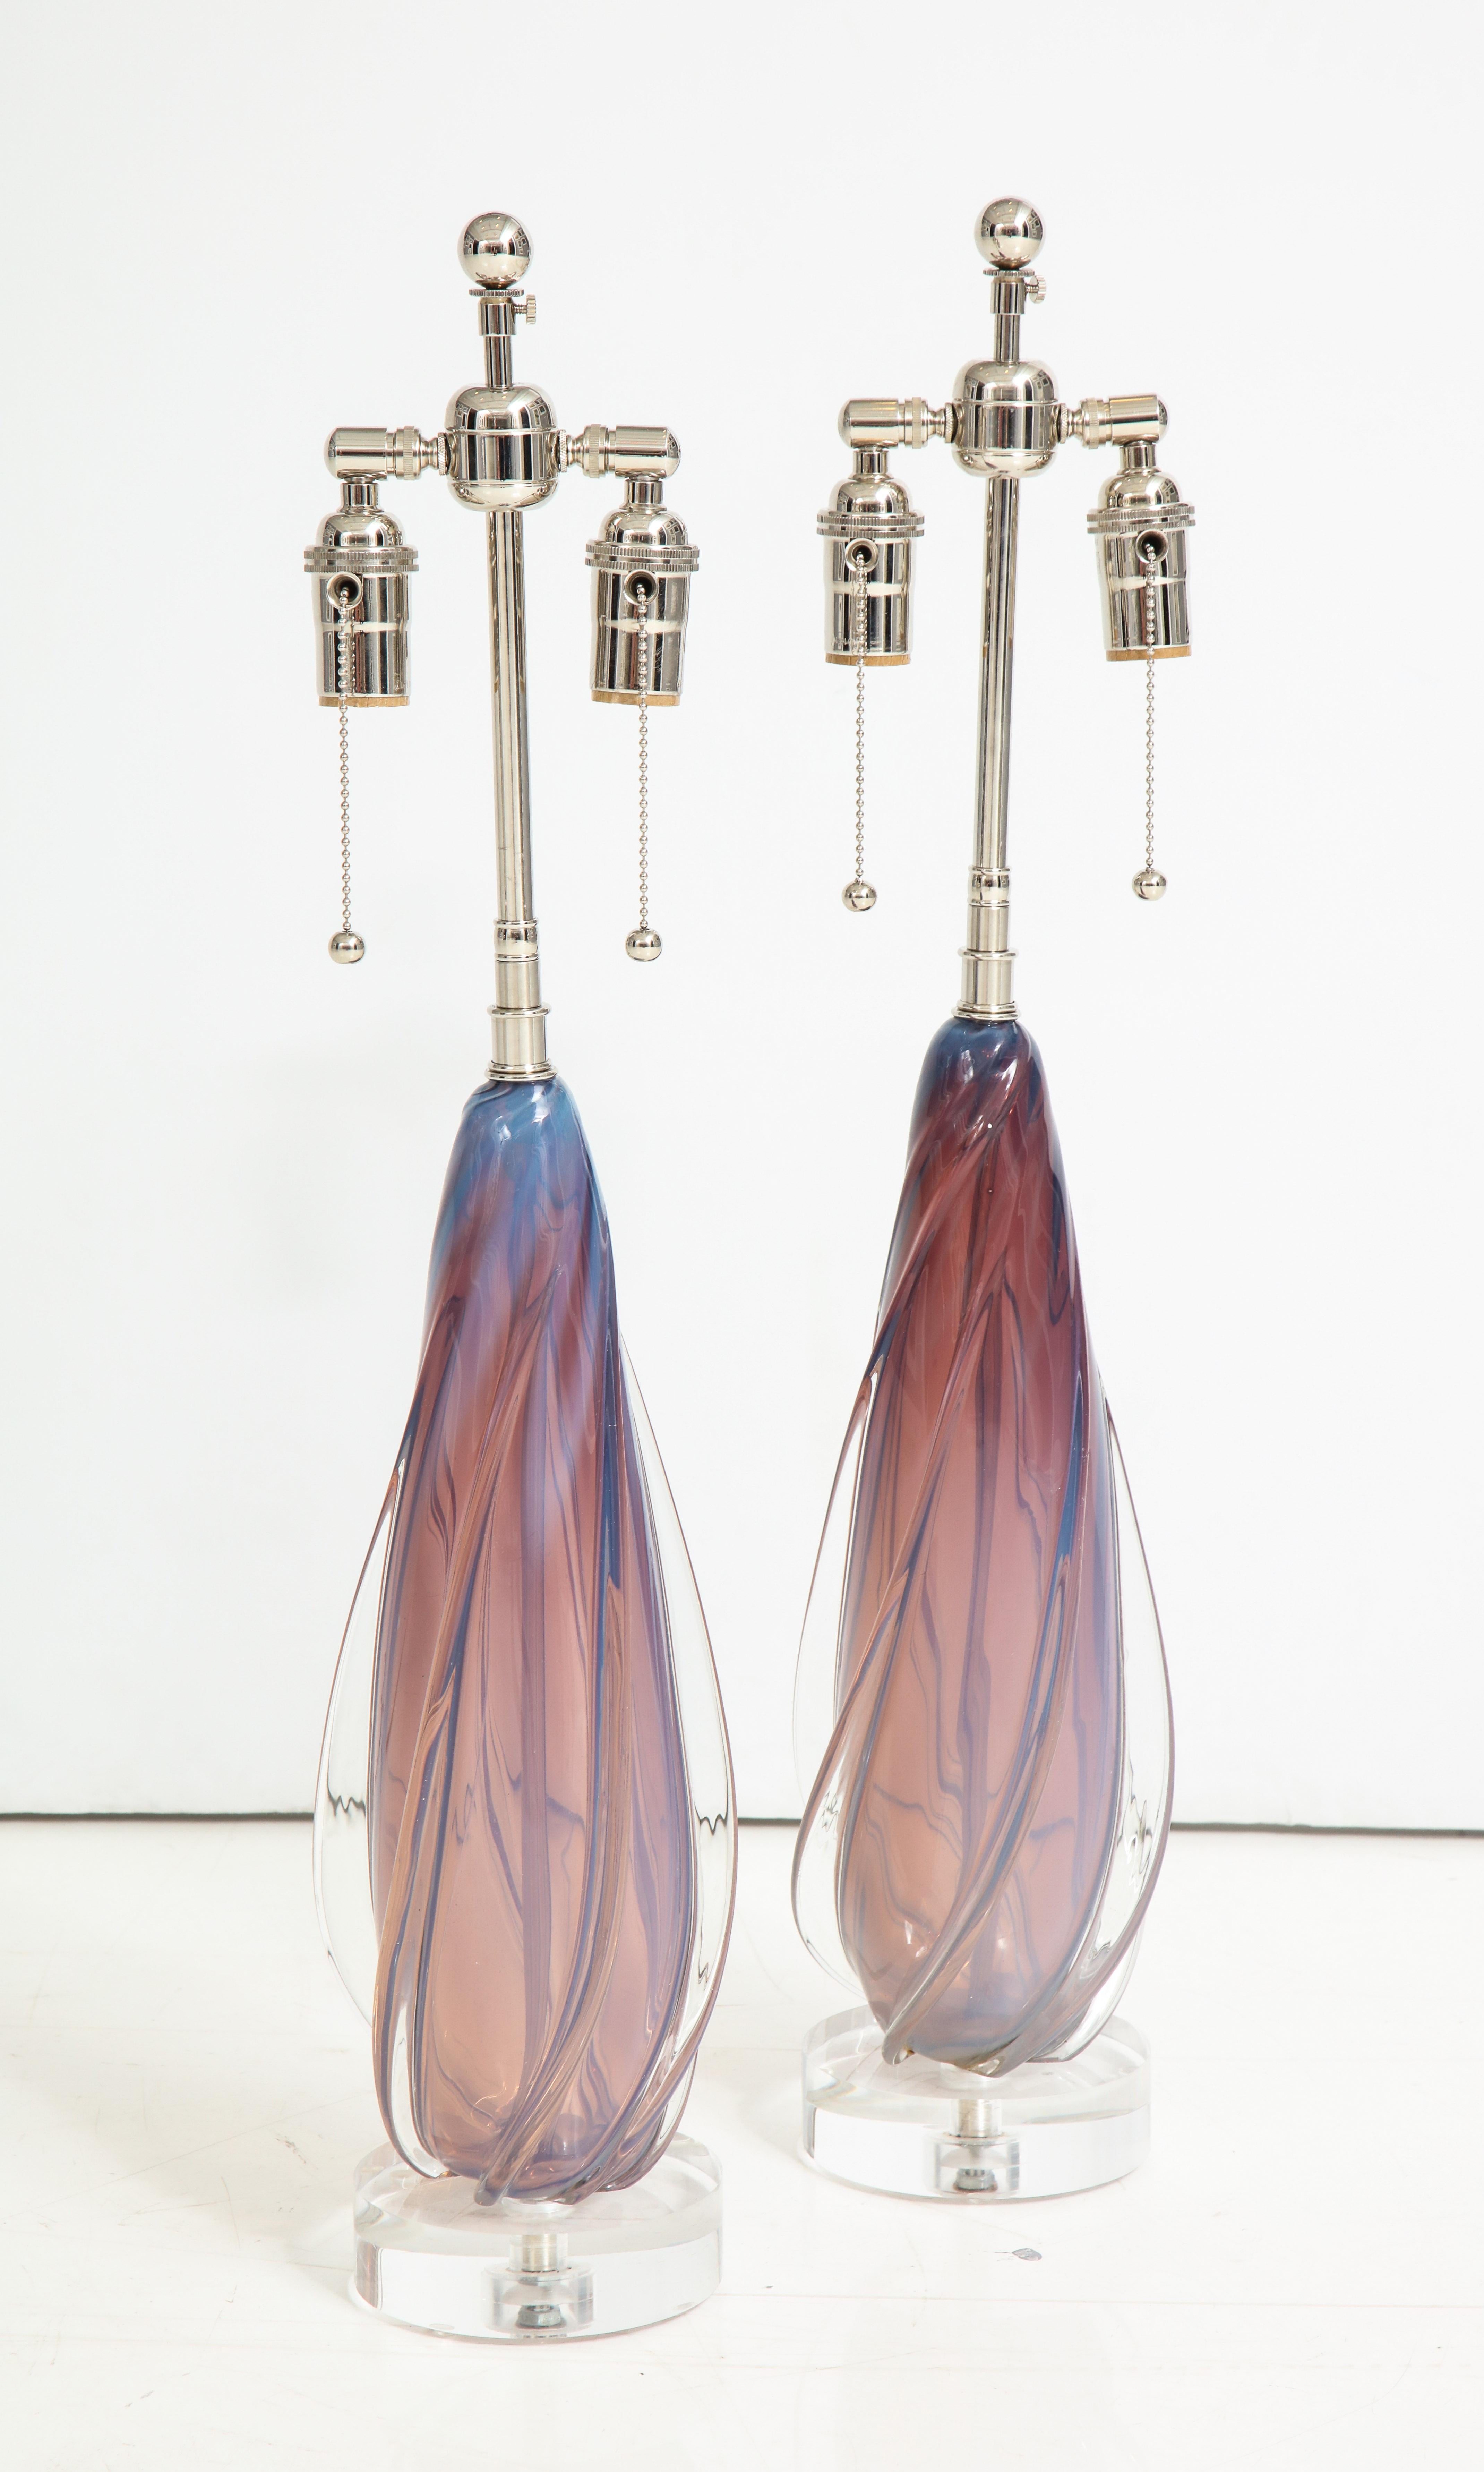 Exquisite pair of Murano lamps By Seguso.
The handblown glass lamp bodies have wonderful mauve, pink and gray tones and are mounted on thick Lucite bases. They have been newly rewired for the US with polished nickel double clusters that take